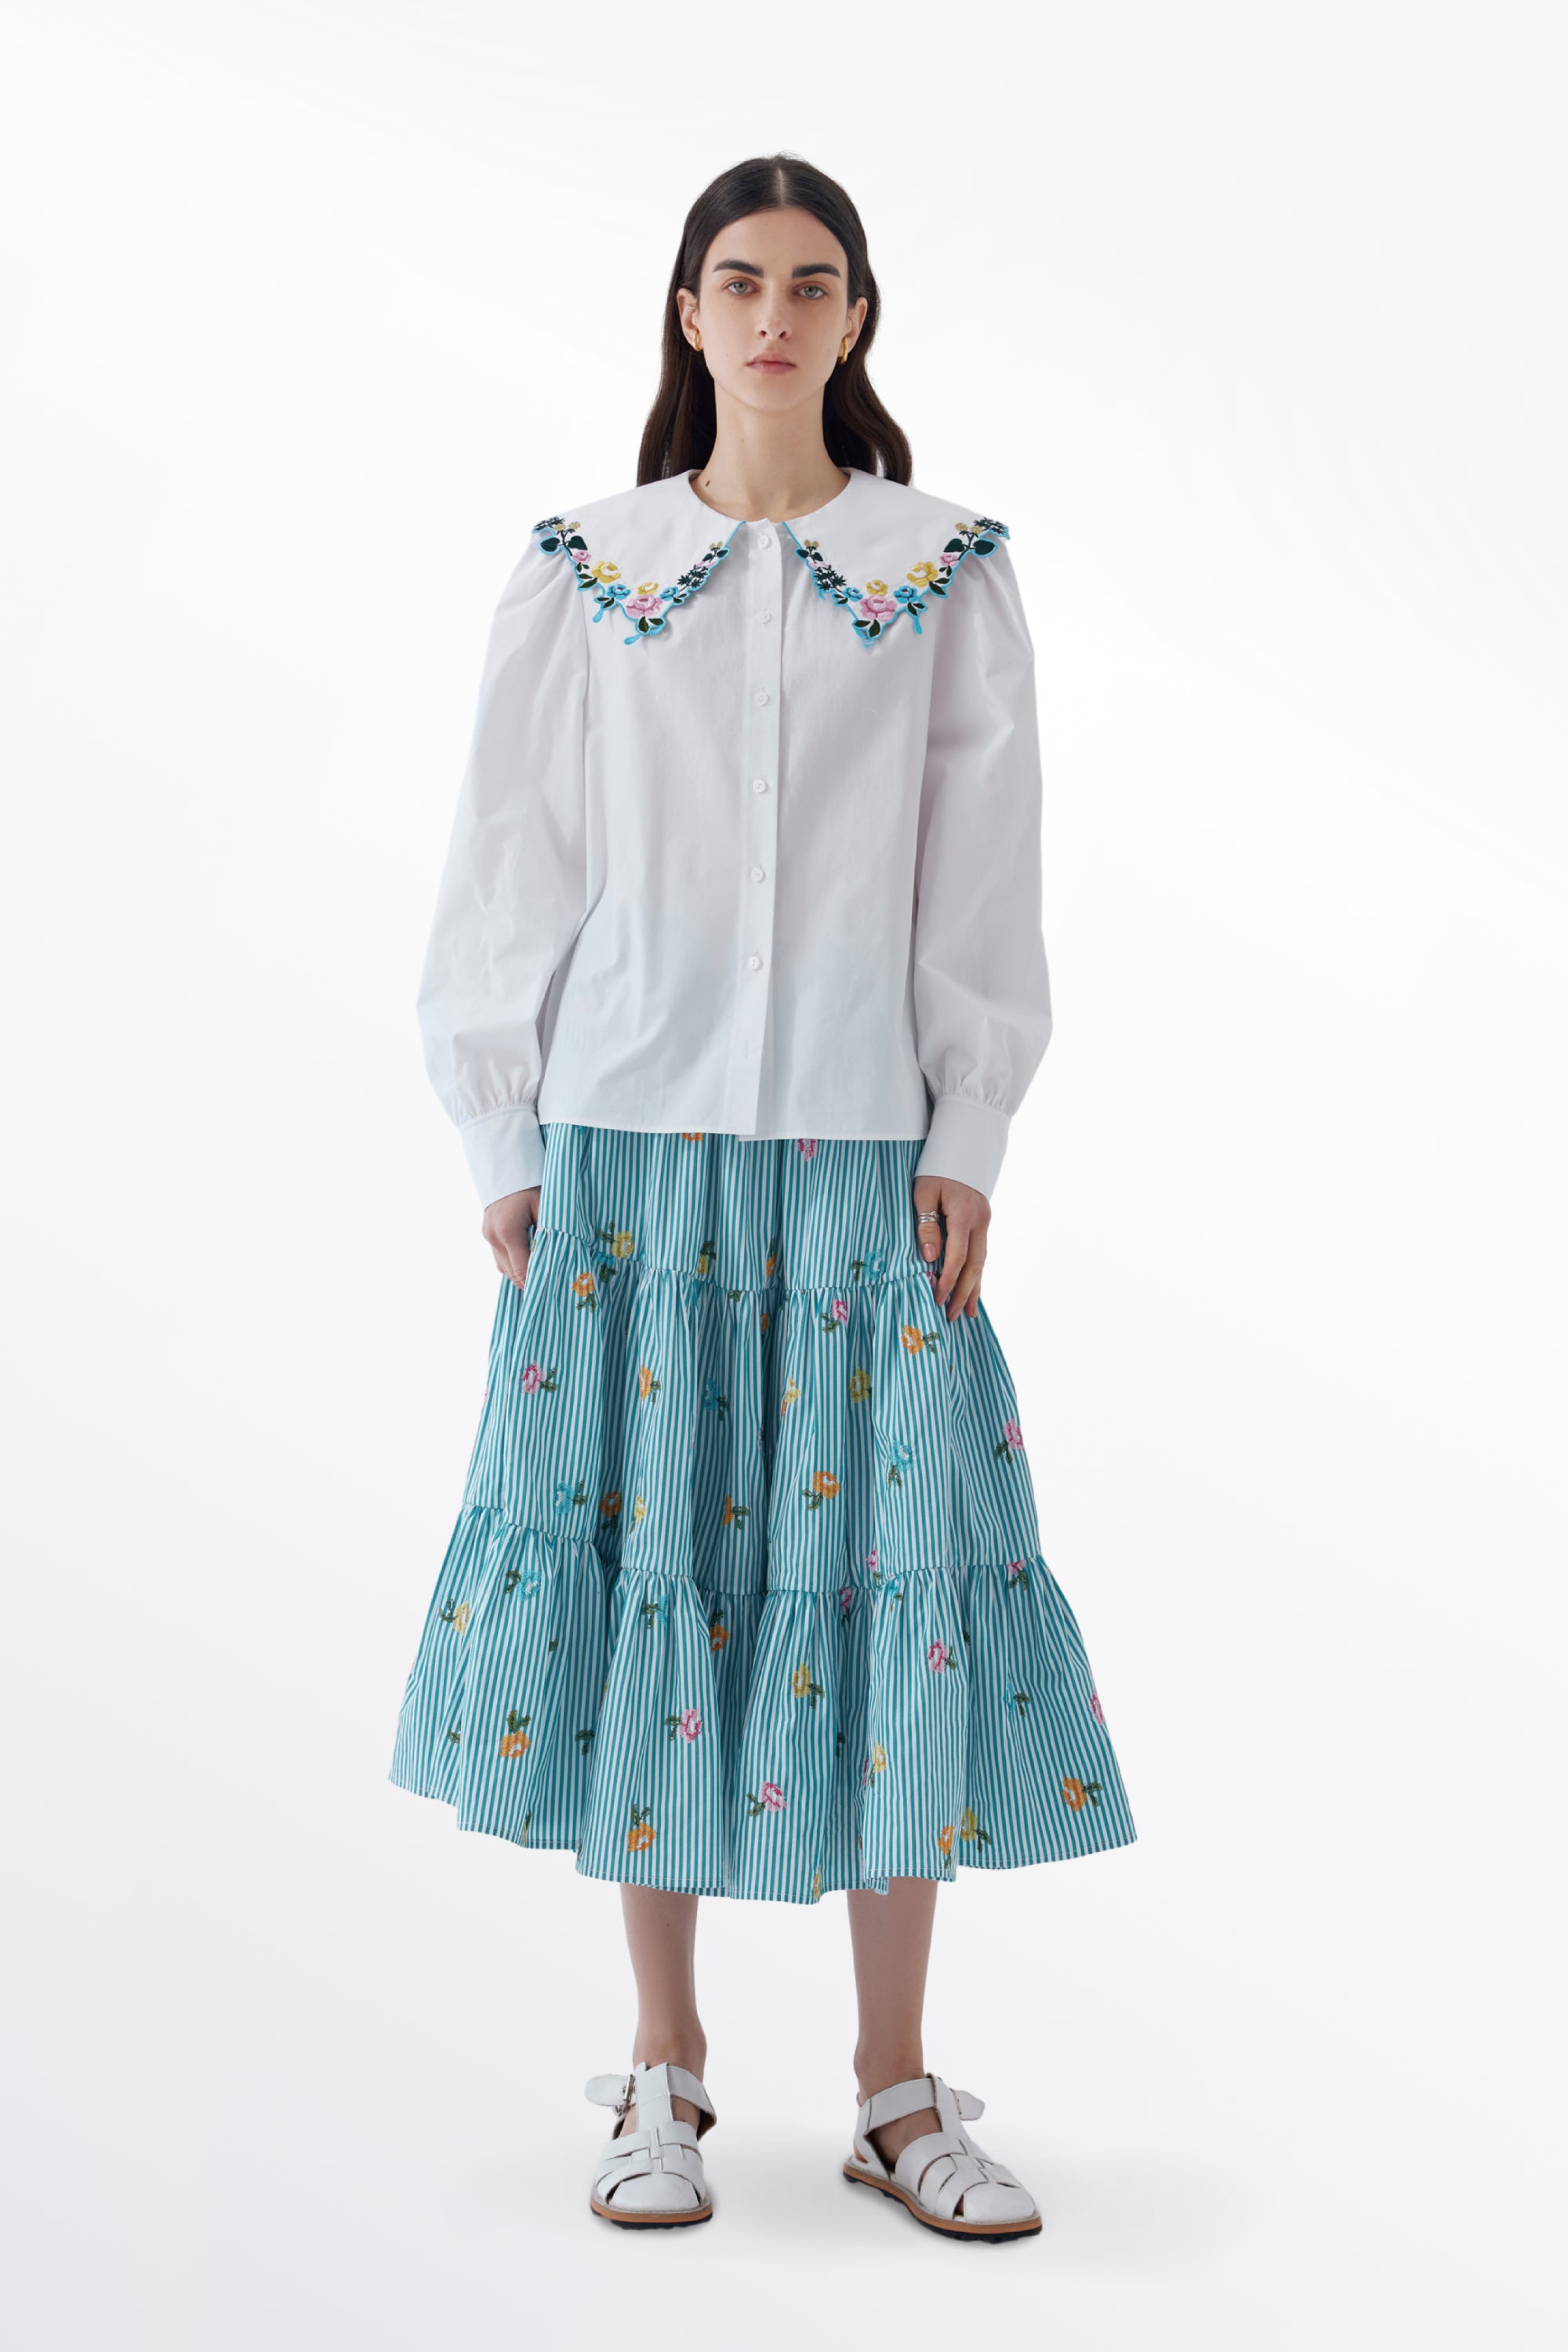 Freya Floral Embroidered Shirt in Cotton